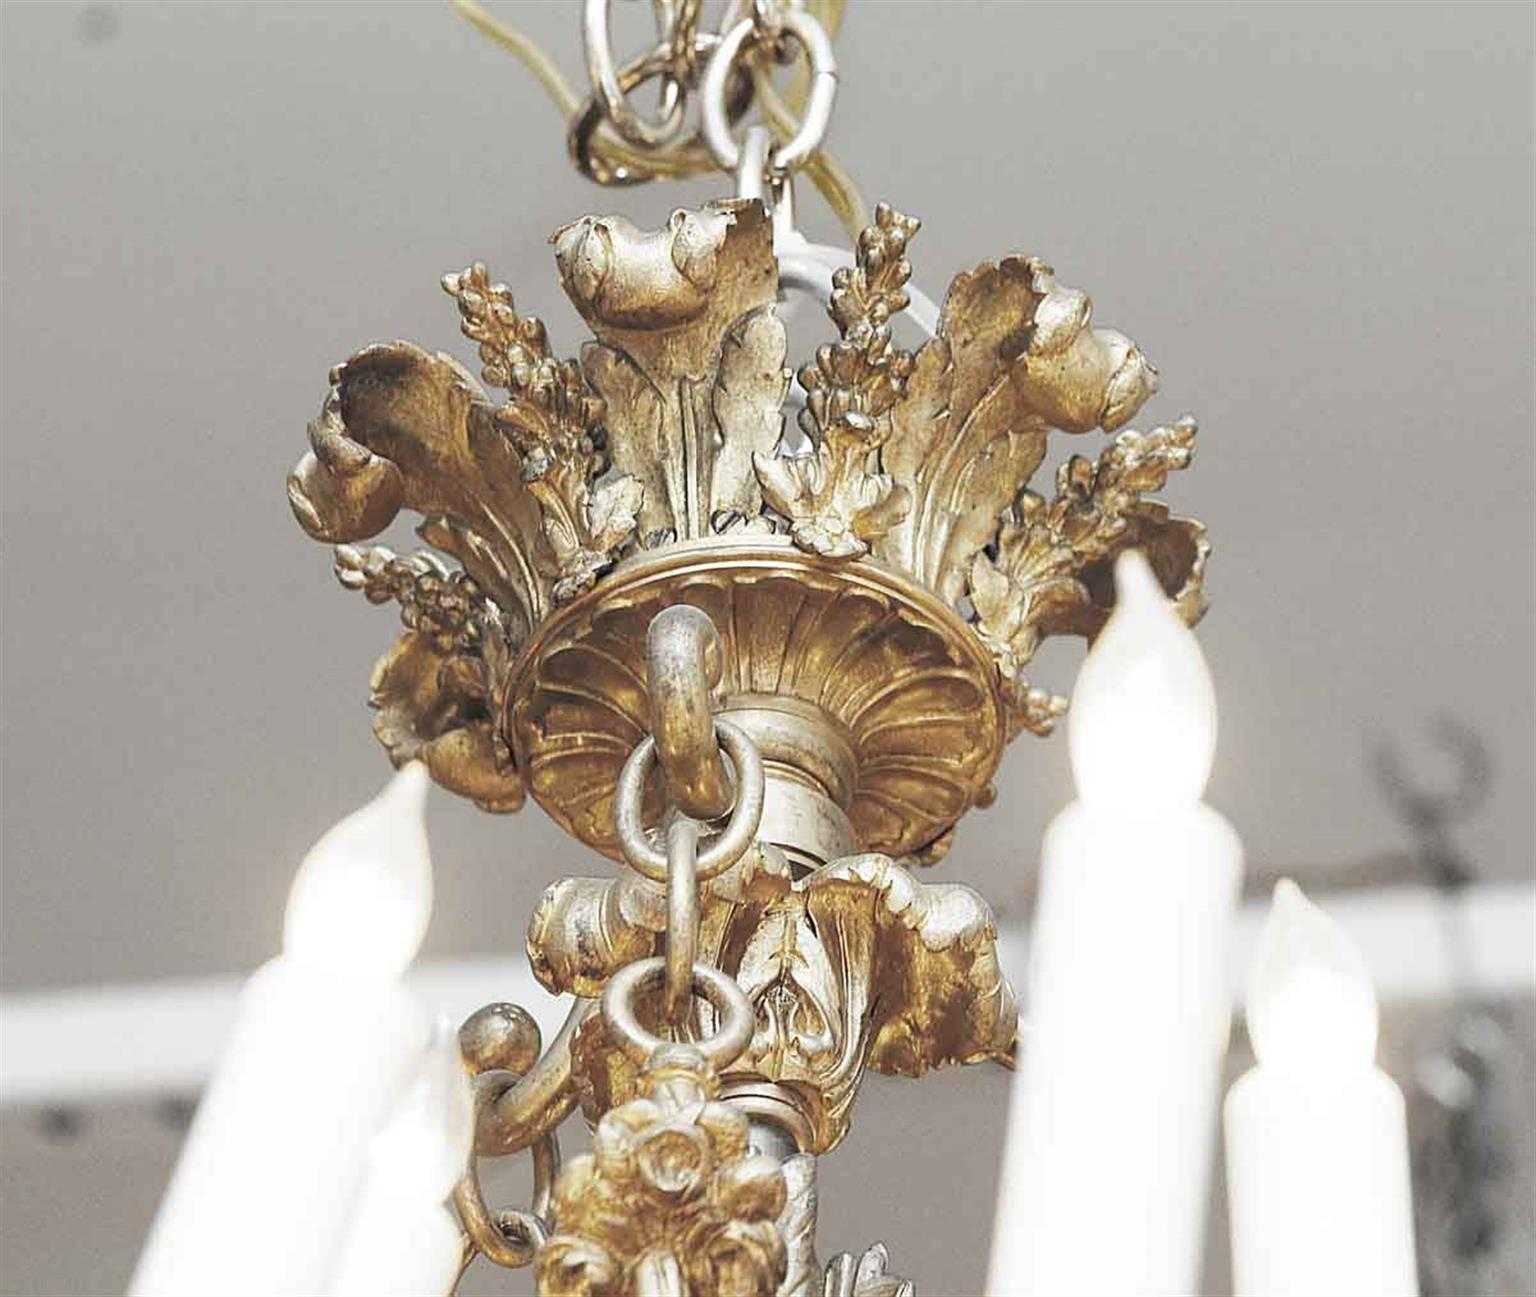 A grand Louis XV style chandelier in gilded bronze, with arrow and quiver forms, finely detailed cups, bobeches, and curling florets on the 16 arms. Please note all candles have a slight original lean inwards. Made in France, circa 1860. This can be